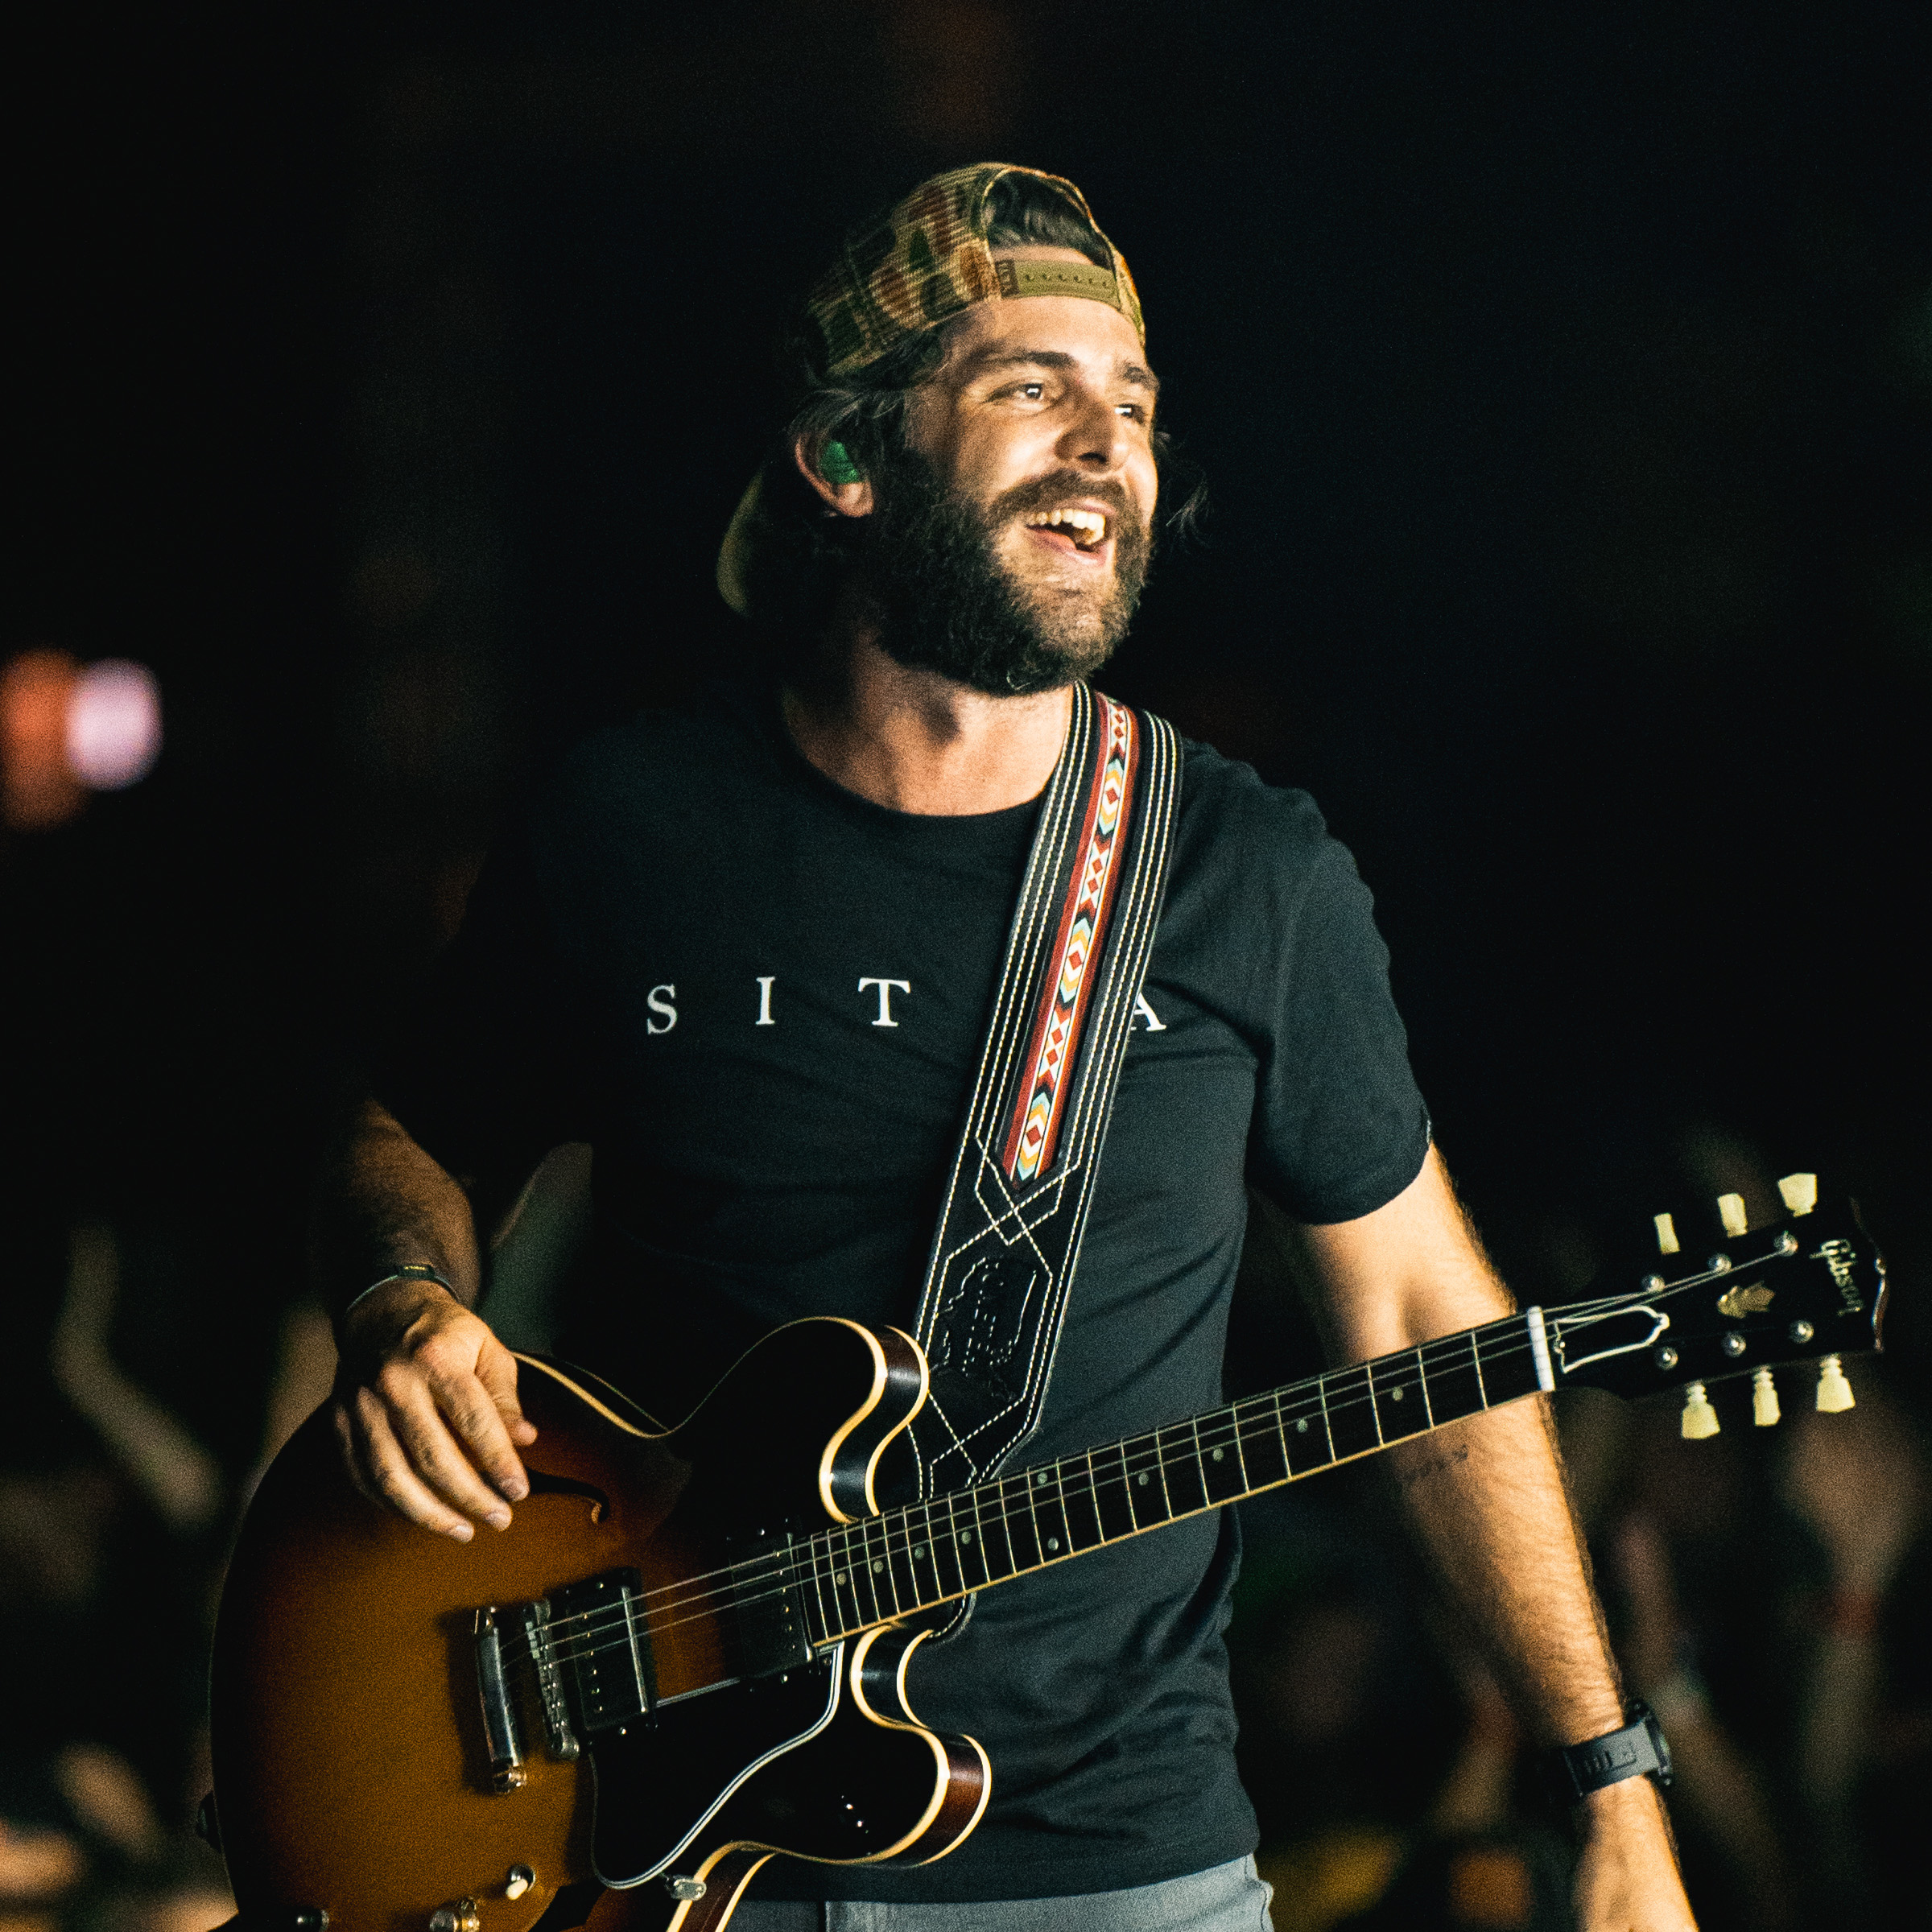 Country music artist Thomas Rhett performed on stage, holding a microphone and singing into it. He wears a denim jacket and a cowboy hat, while the crowd cheers in the background."